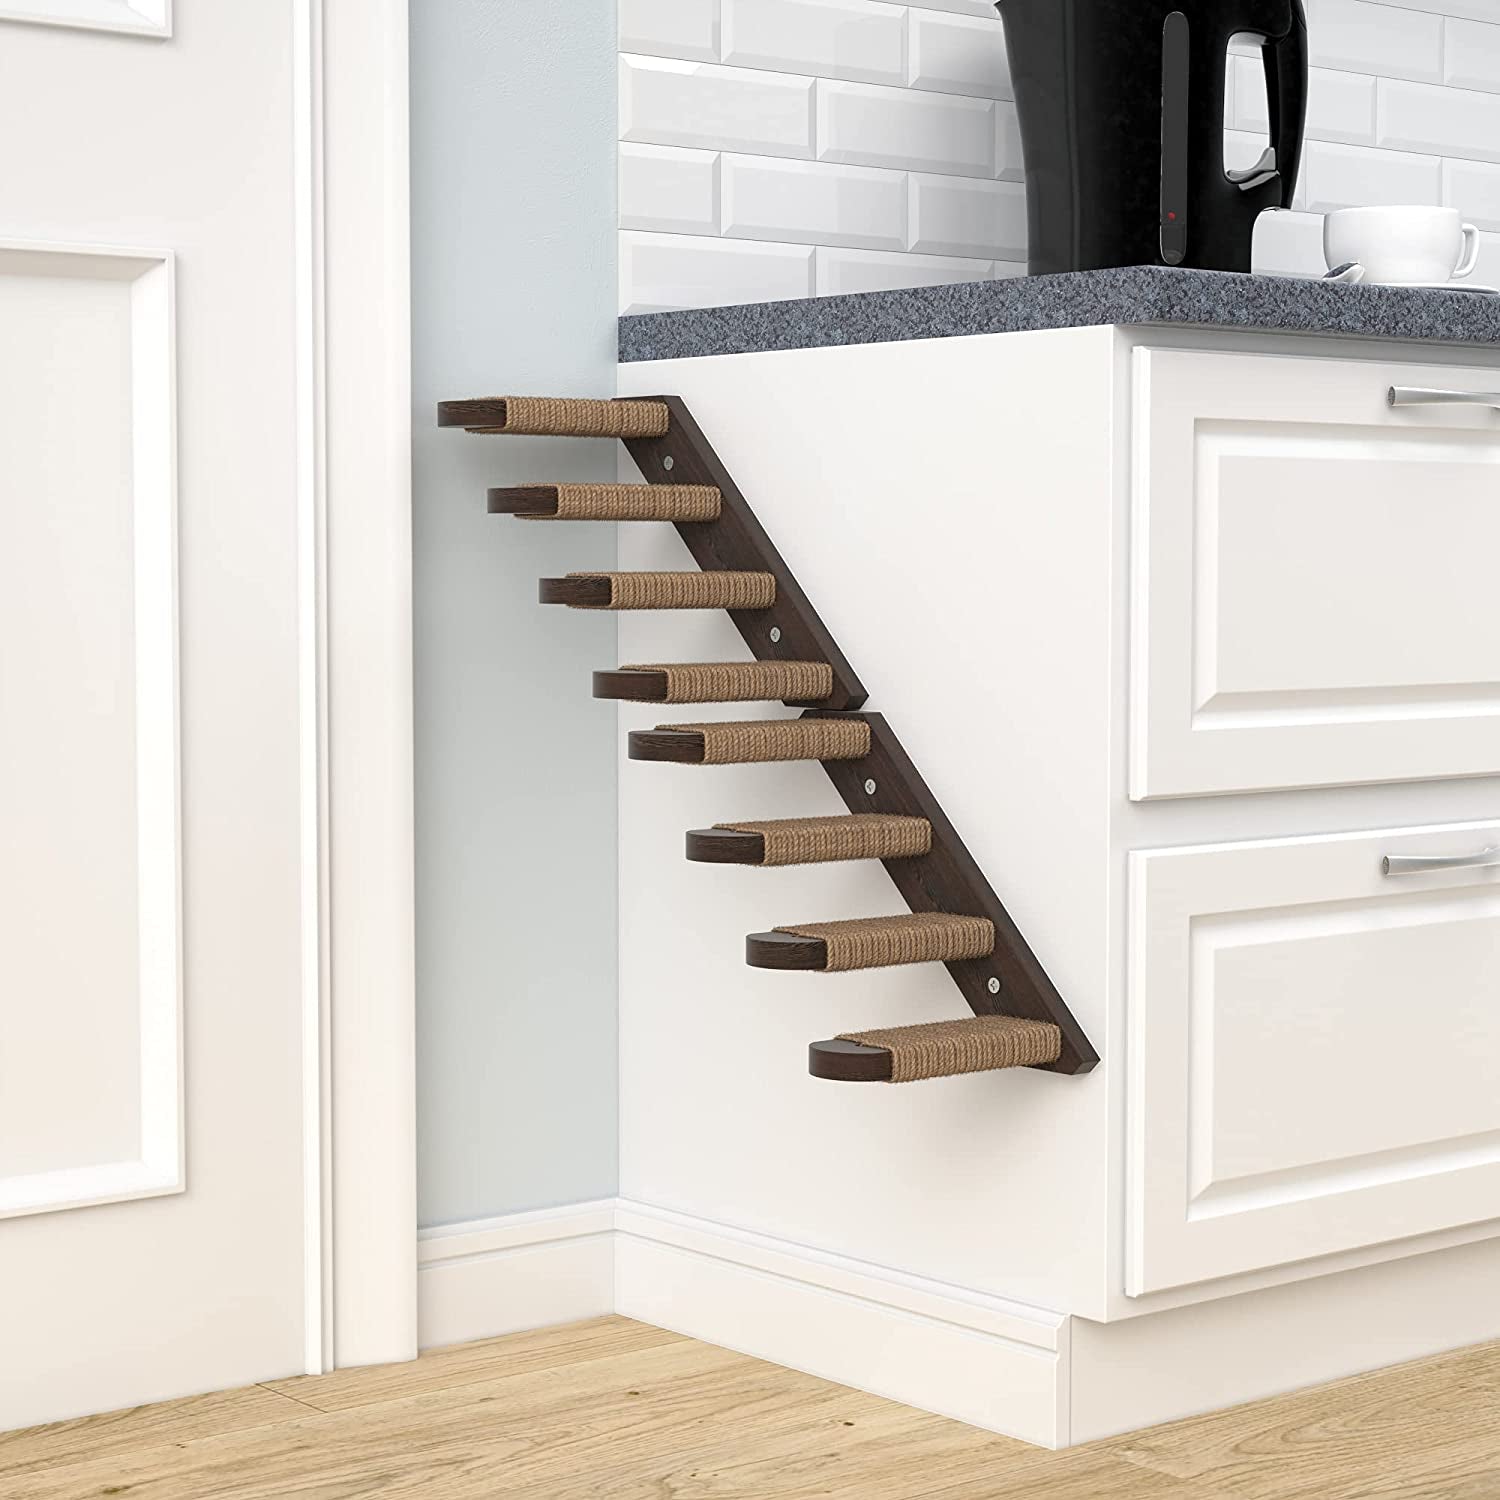 Cat Steps - Solid Rubber Wood Cat Stairs Great for Scratching and Climbing - Easy to Install Wall Mounted Cat Shelves for Playful Cats (Brown, Right to Left)